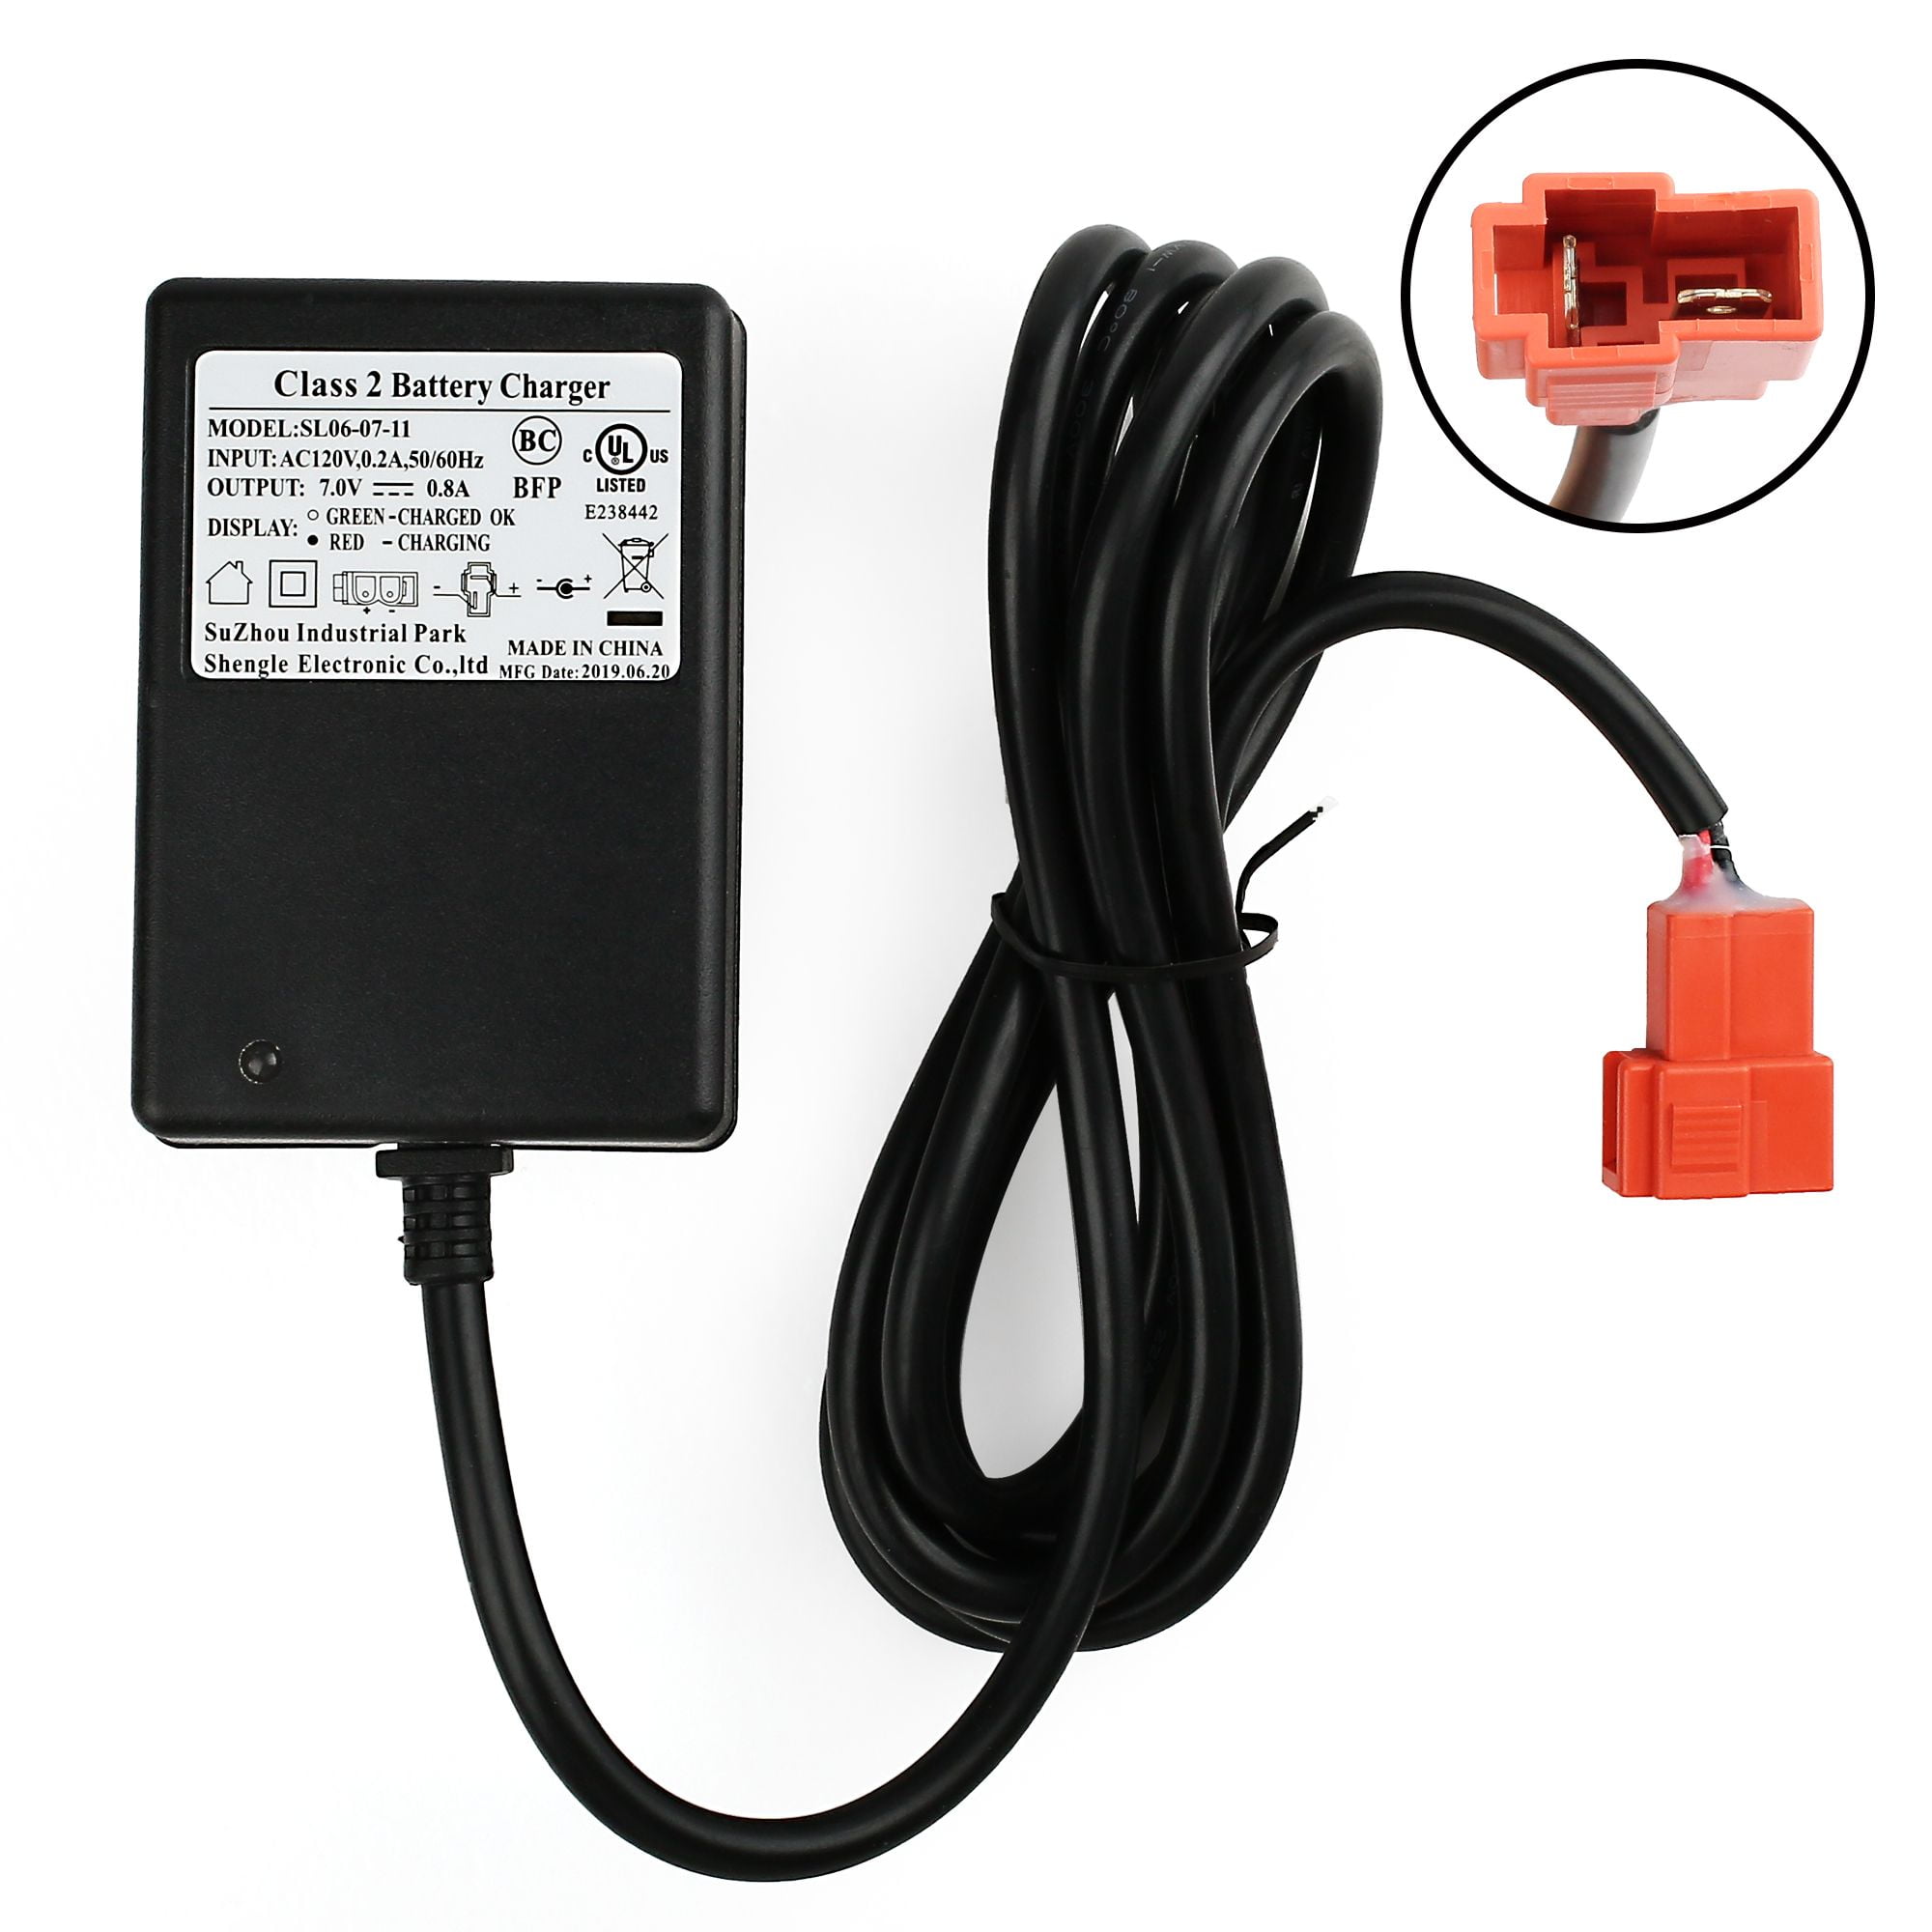 B Charger AC adapter 6V battery ride on car  PACIFIC CYCLE Disney Quad 4 wheeler 